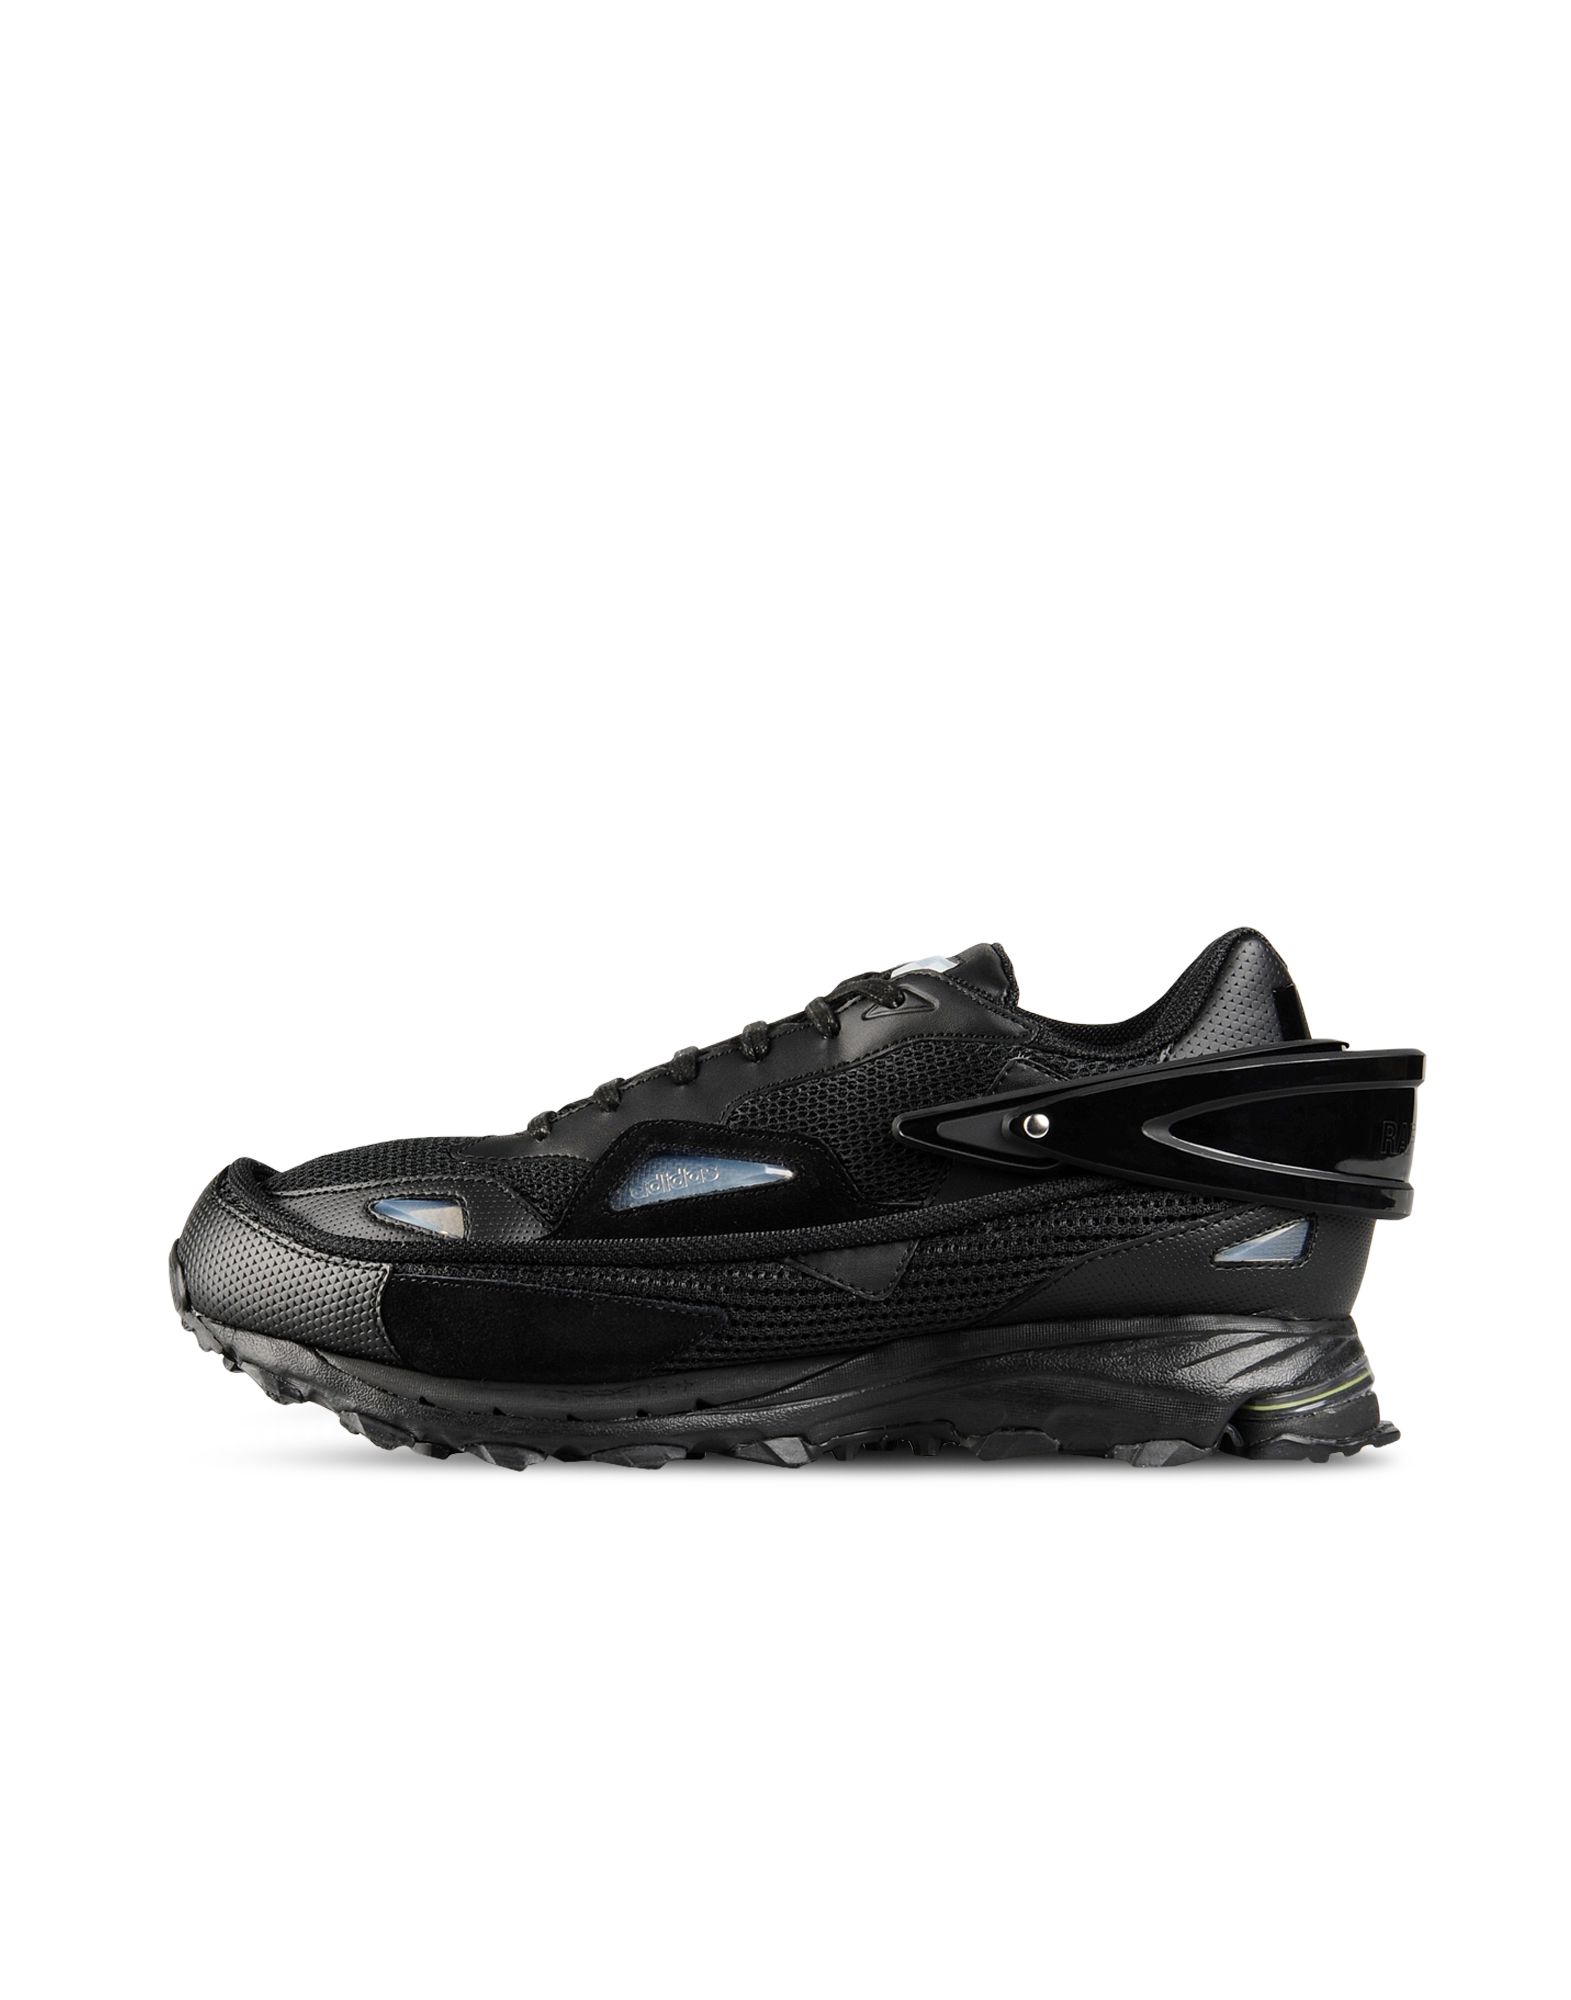 Adidas By Raf Simons Response 2 Sneakers | Adidas Y-3 Official Store